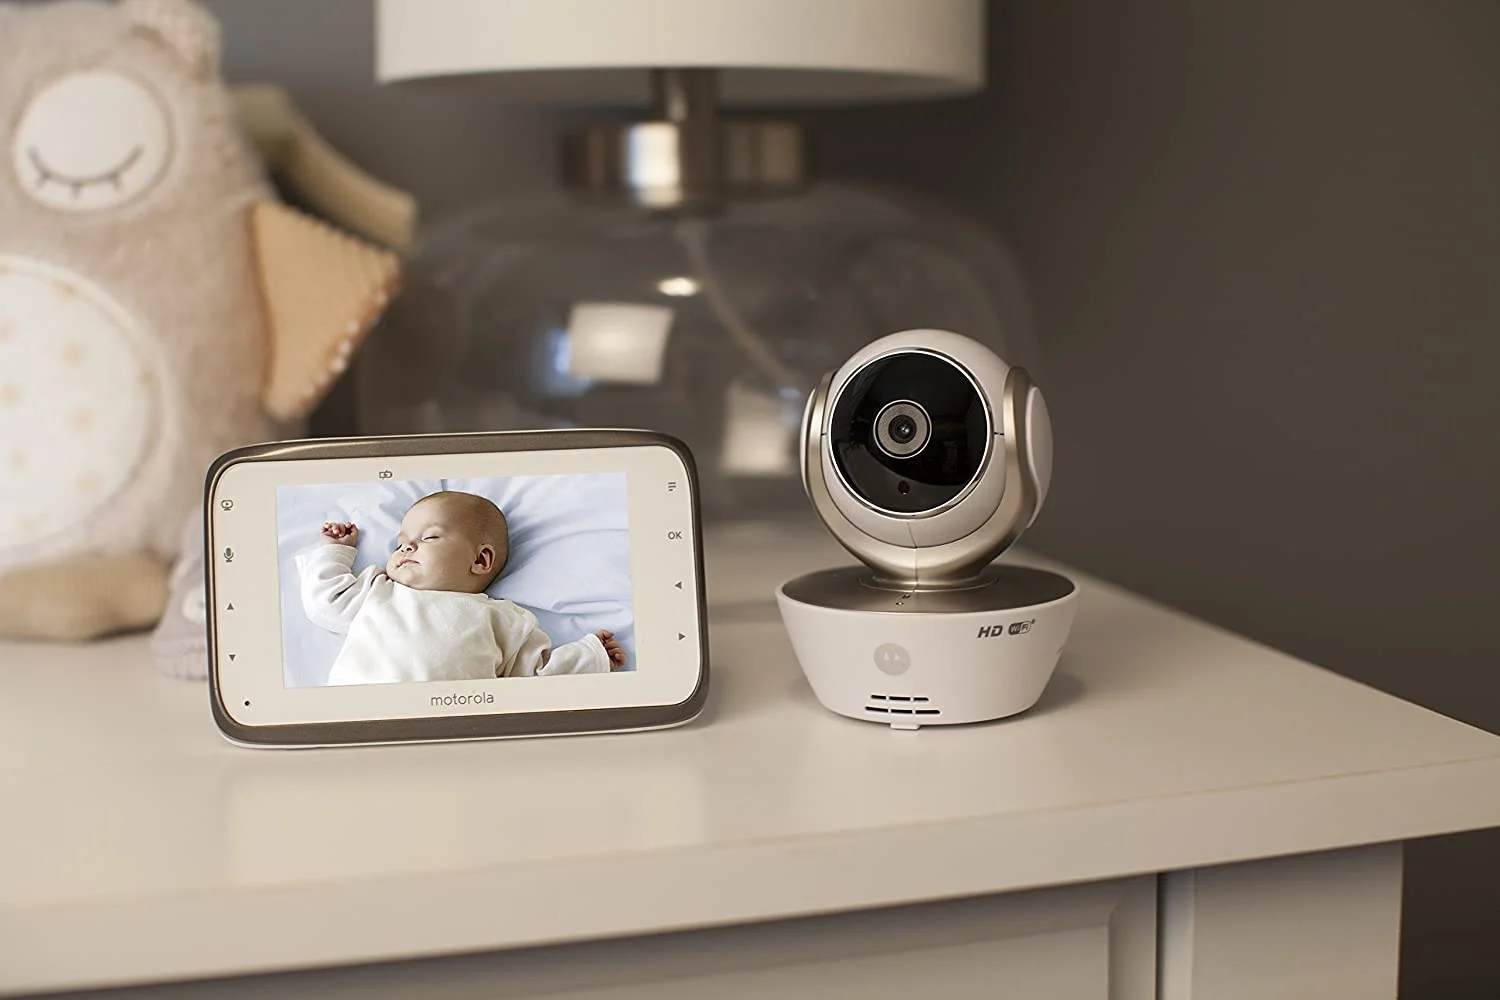 Father of the year Engineer develops smart camera that predicts baby's crying